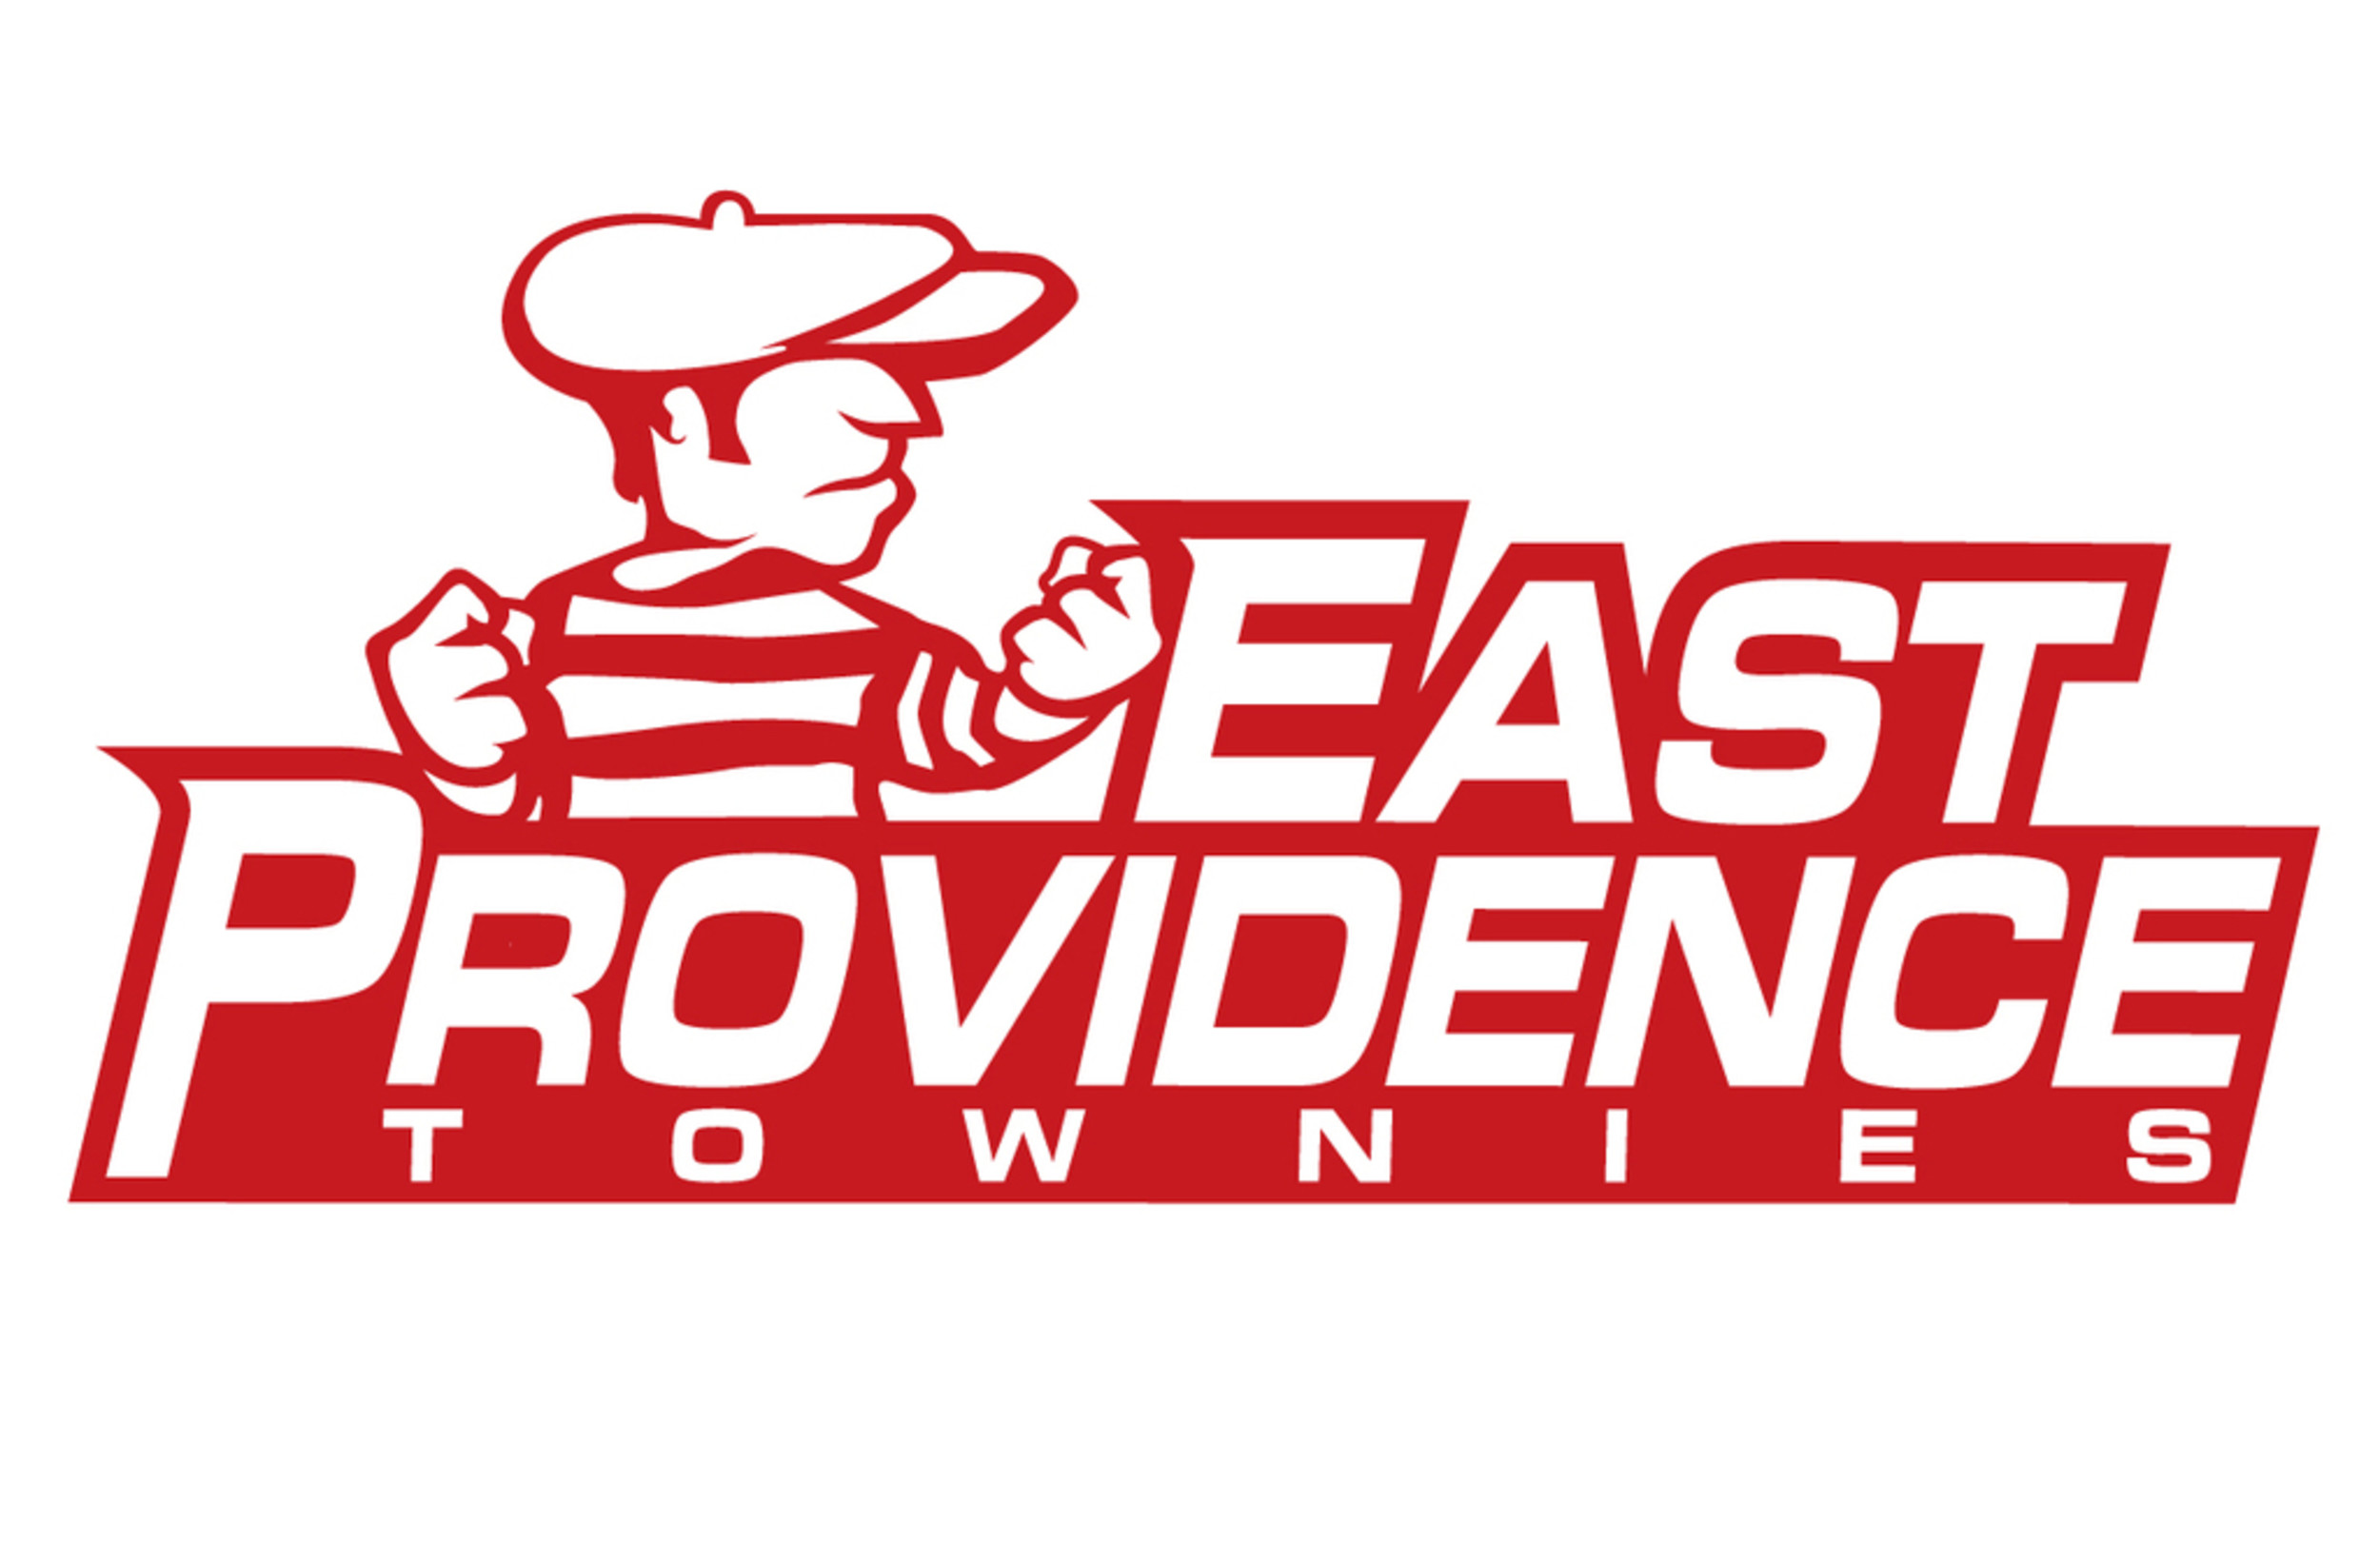 East Providence Townies – East Providence School District